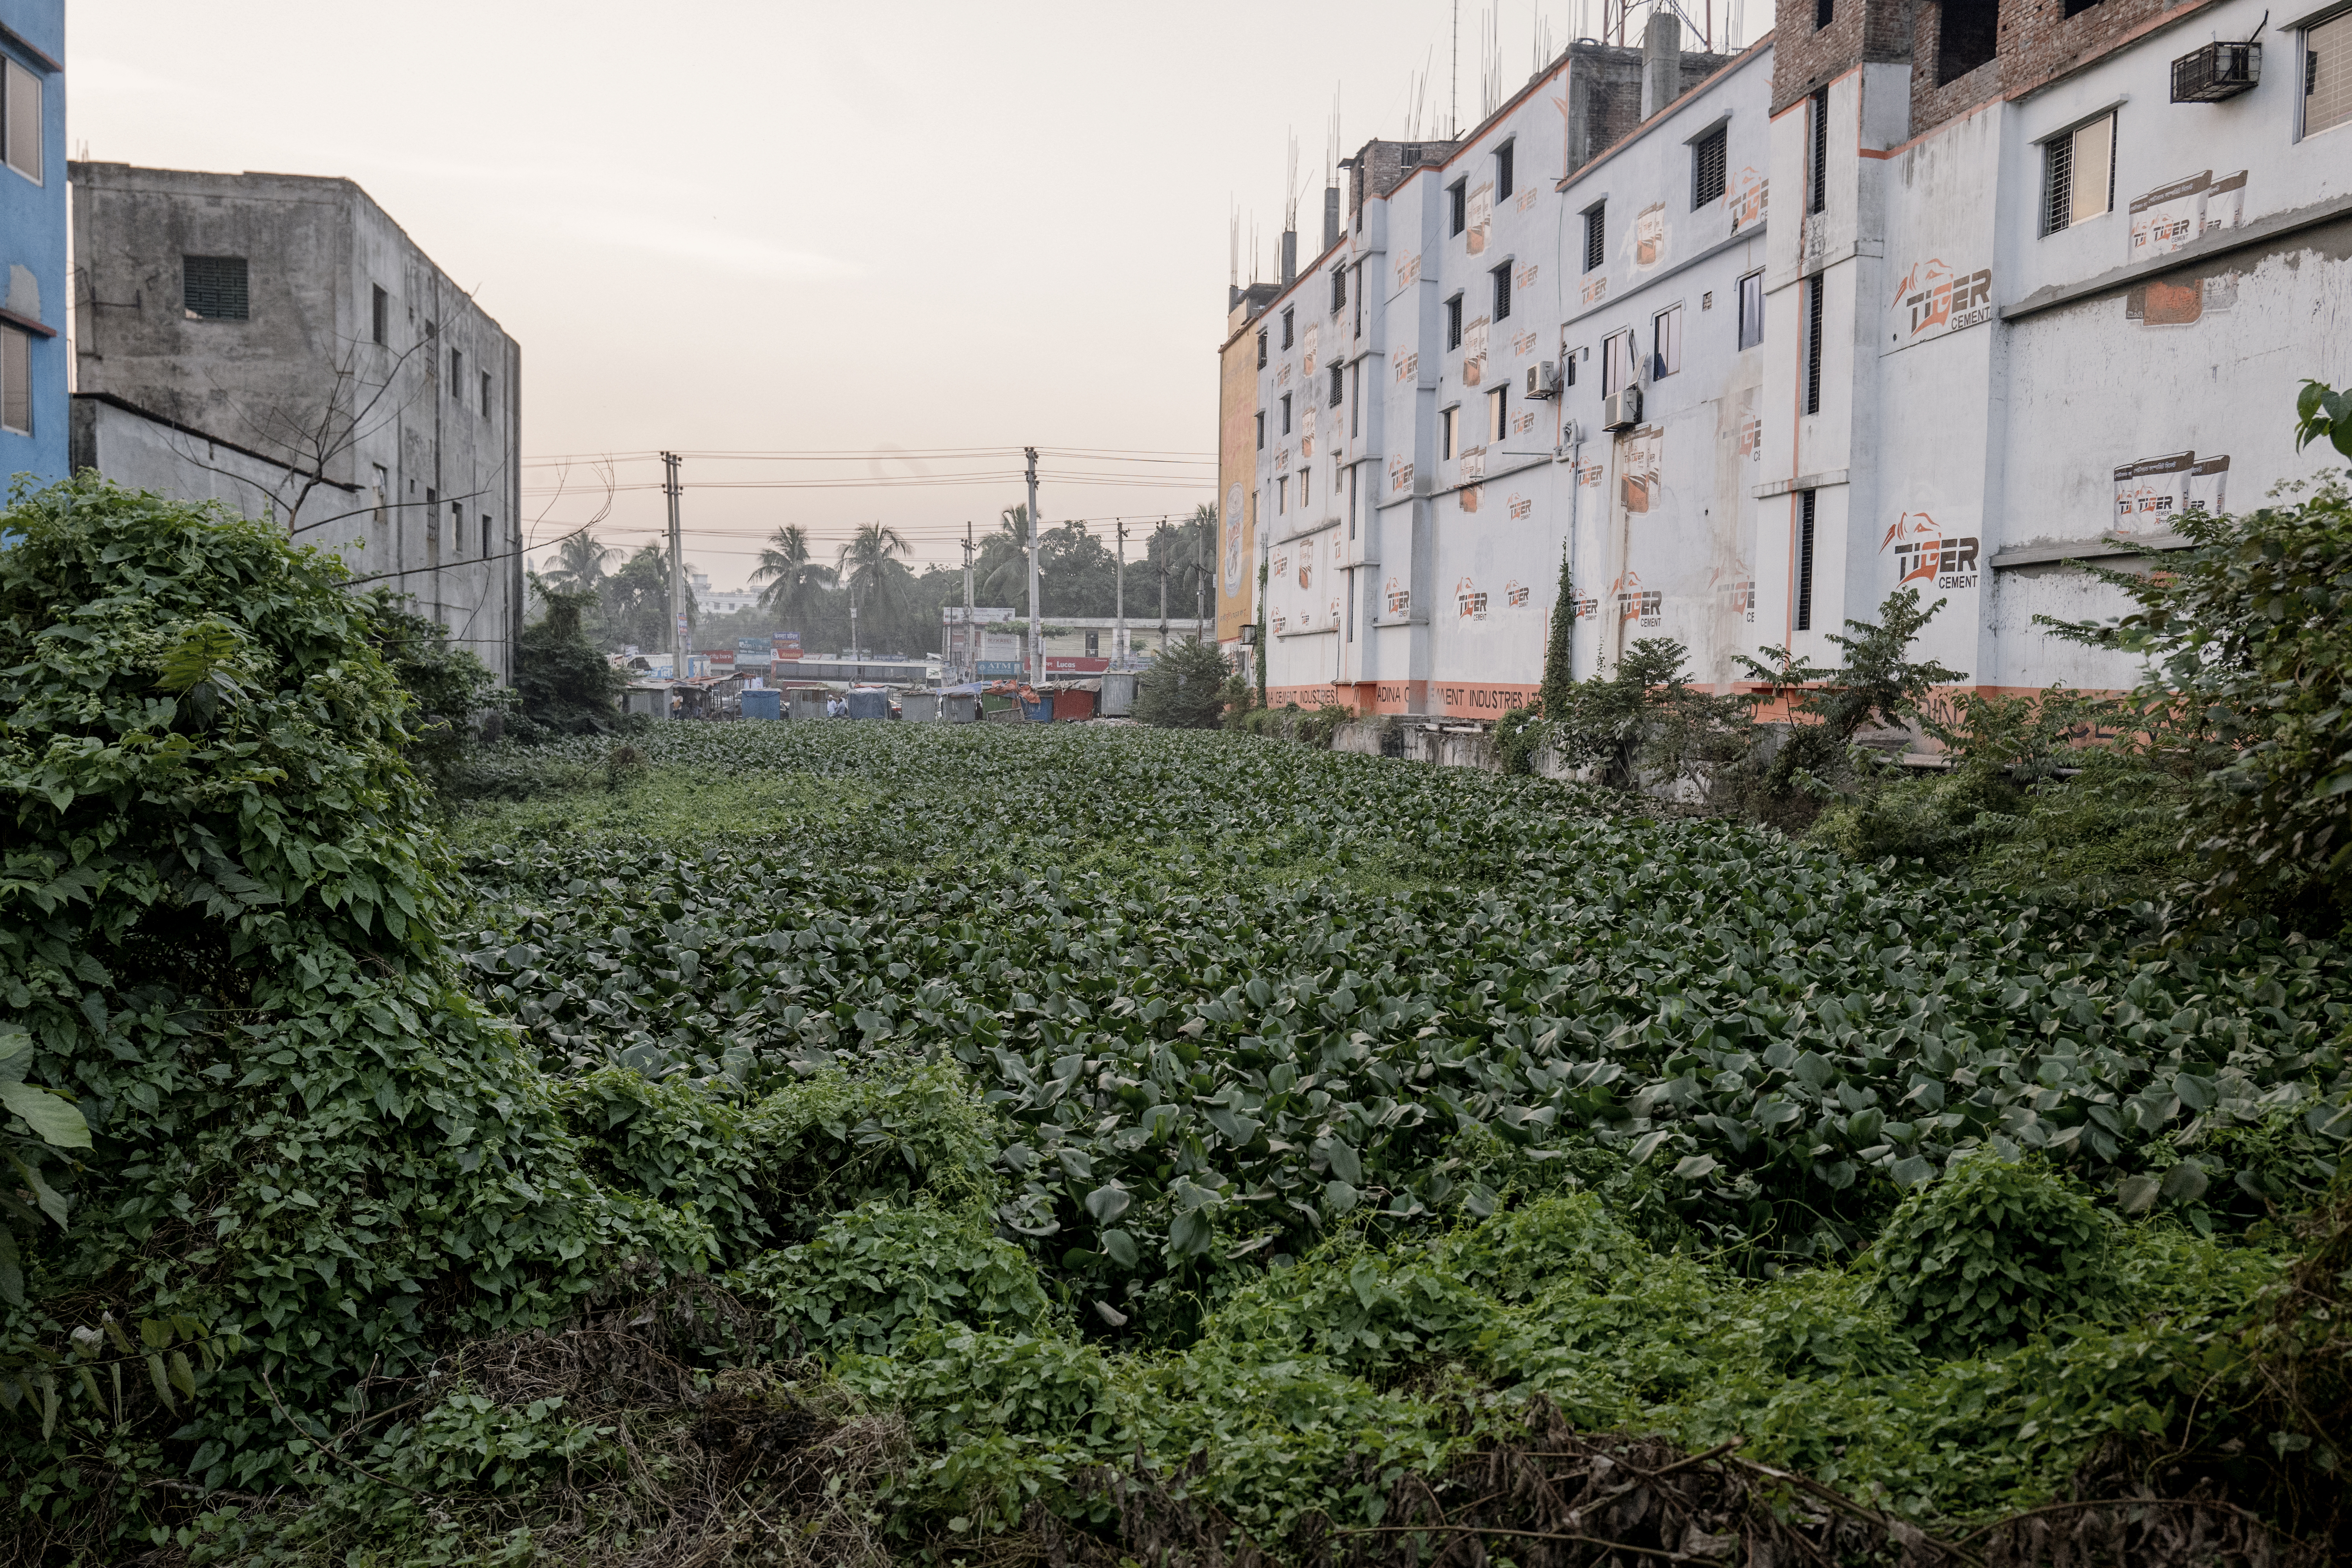 Empty lot with shrubs growing in the open area where Rana Plaza used to be.